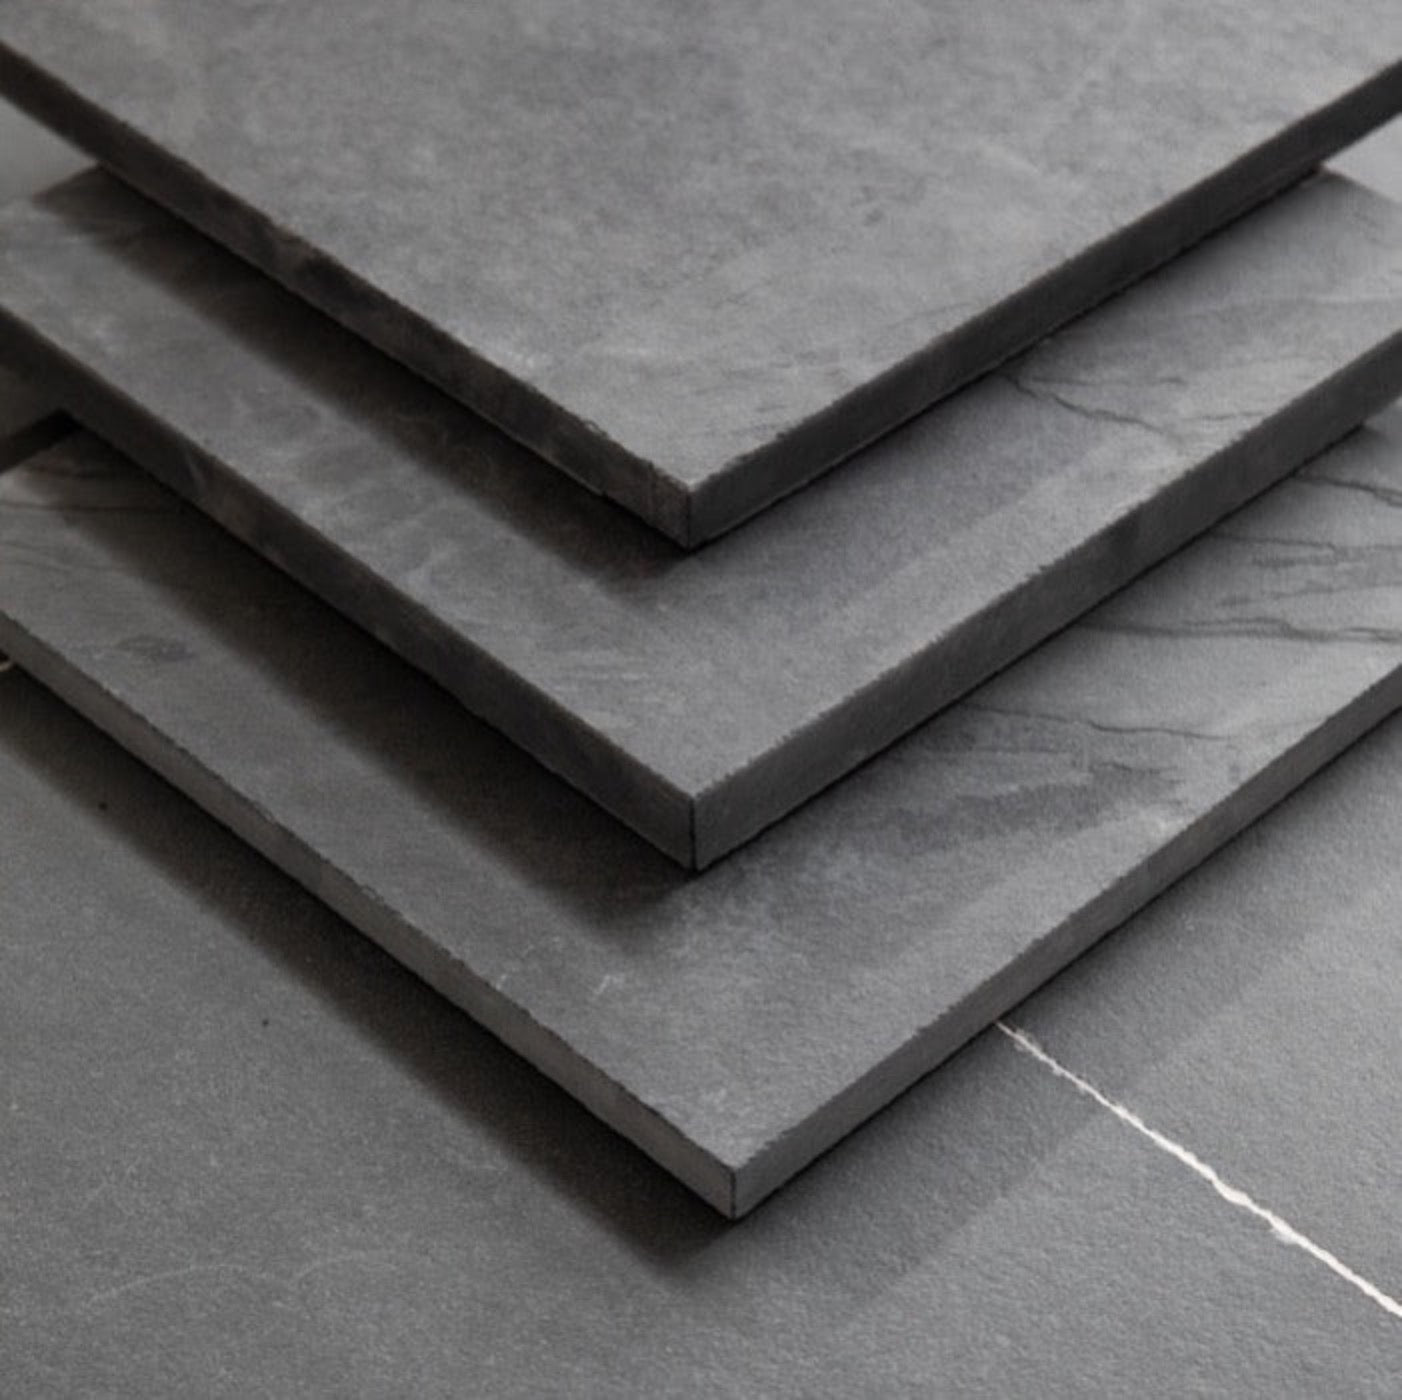 Black Slate Paving Slabs | 800 x 400 x 20 mm | As low as £33.52/m2 | Delivered